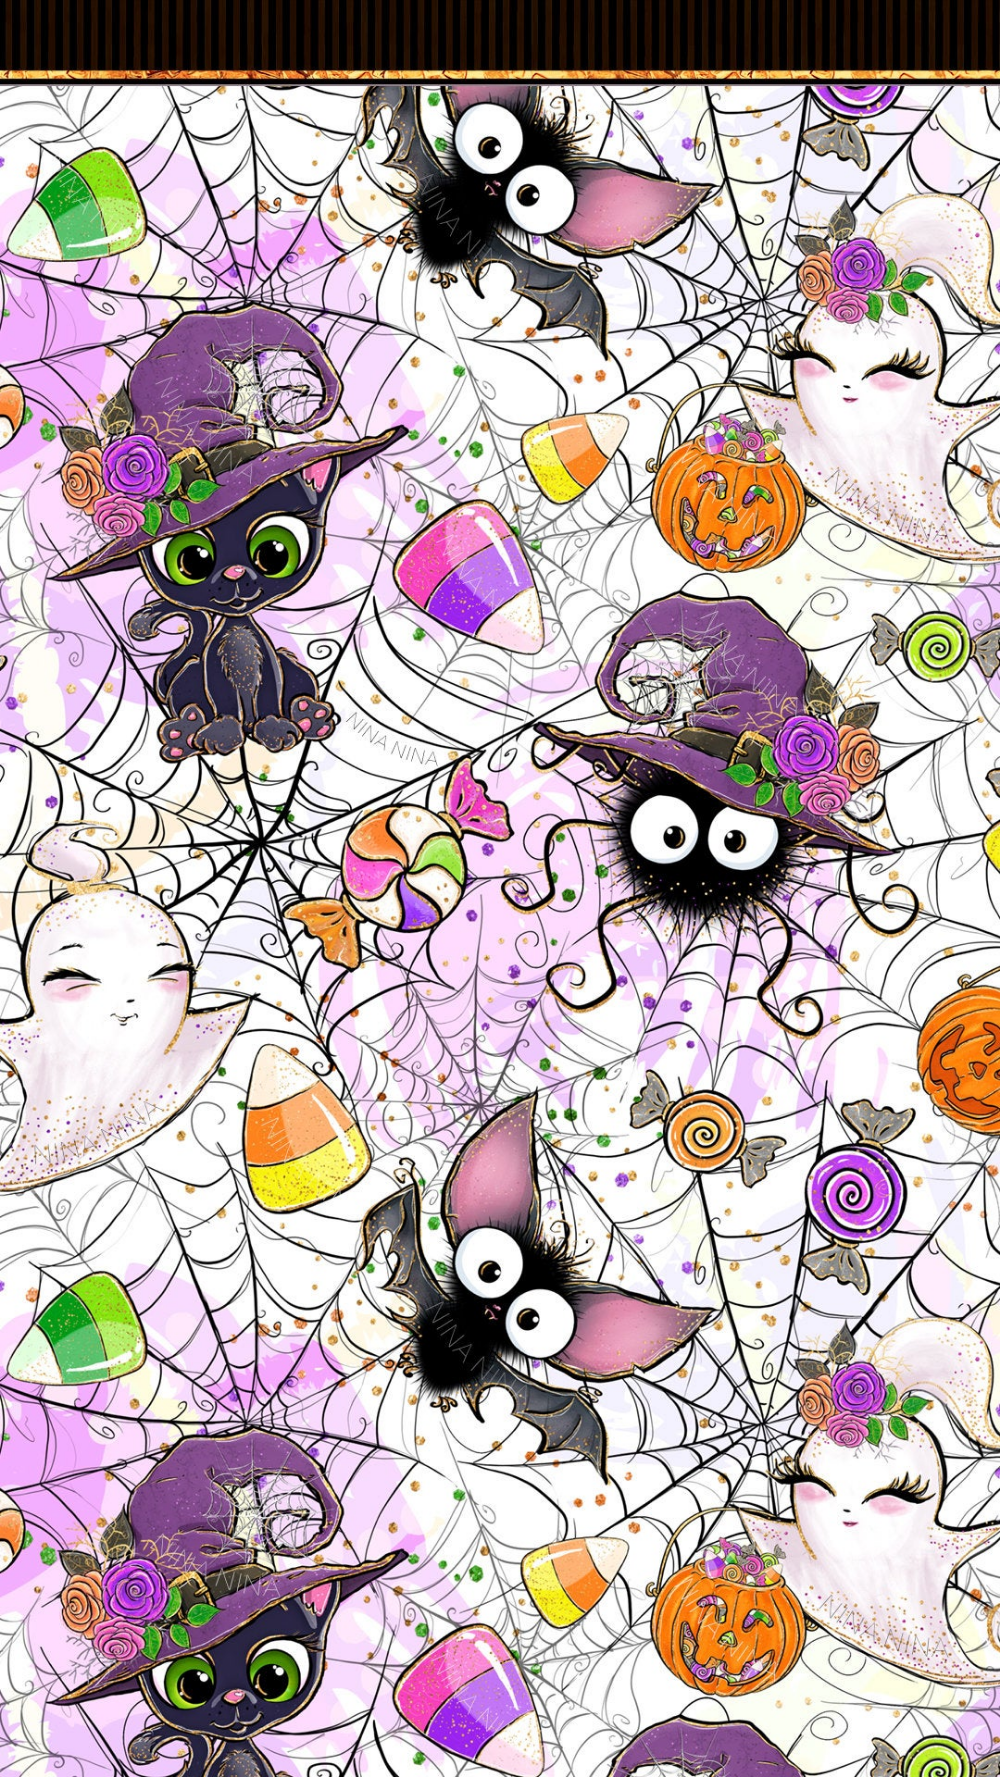 Cute Halloween Clipart Pack, Spooky Glitter Clip Art, Cute Bat, Candy, Spider, Ghosts, Pumpkins, Cobweb, Witch Hat, Broom, Planner Stickers. Halloween clipart, Witch wallpaper, Whimsical halloween